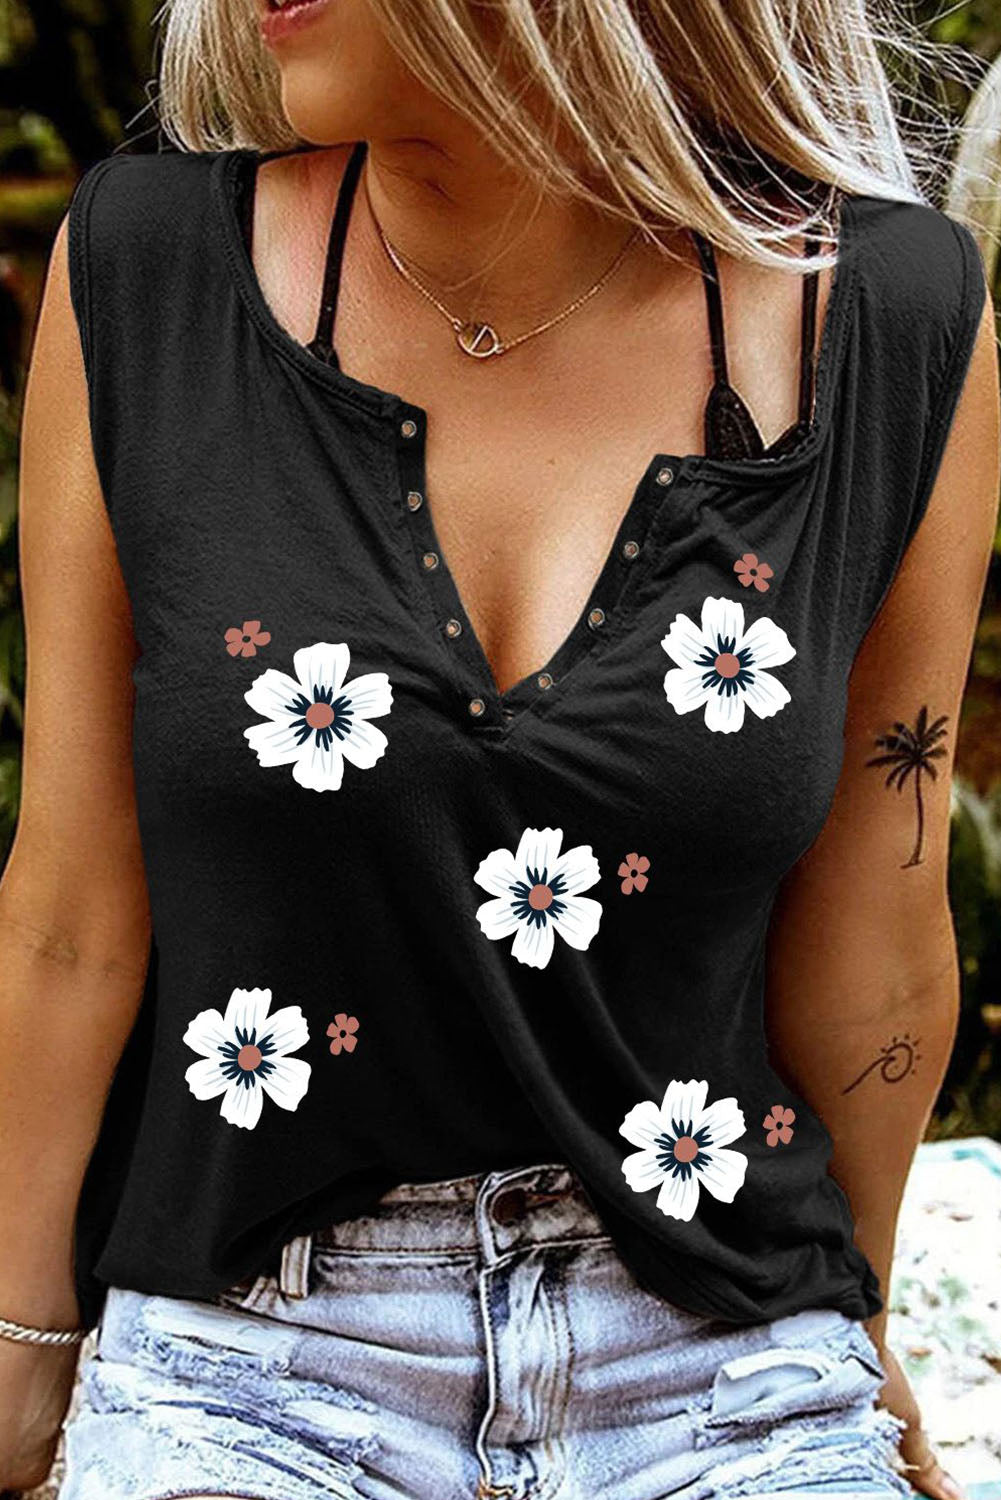 Floral Cherry Blossoms Tank Tops $ 17.99 - Evaless